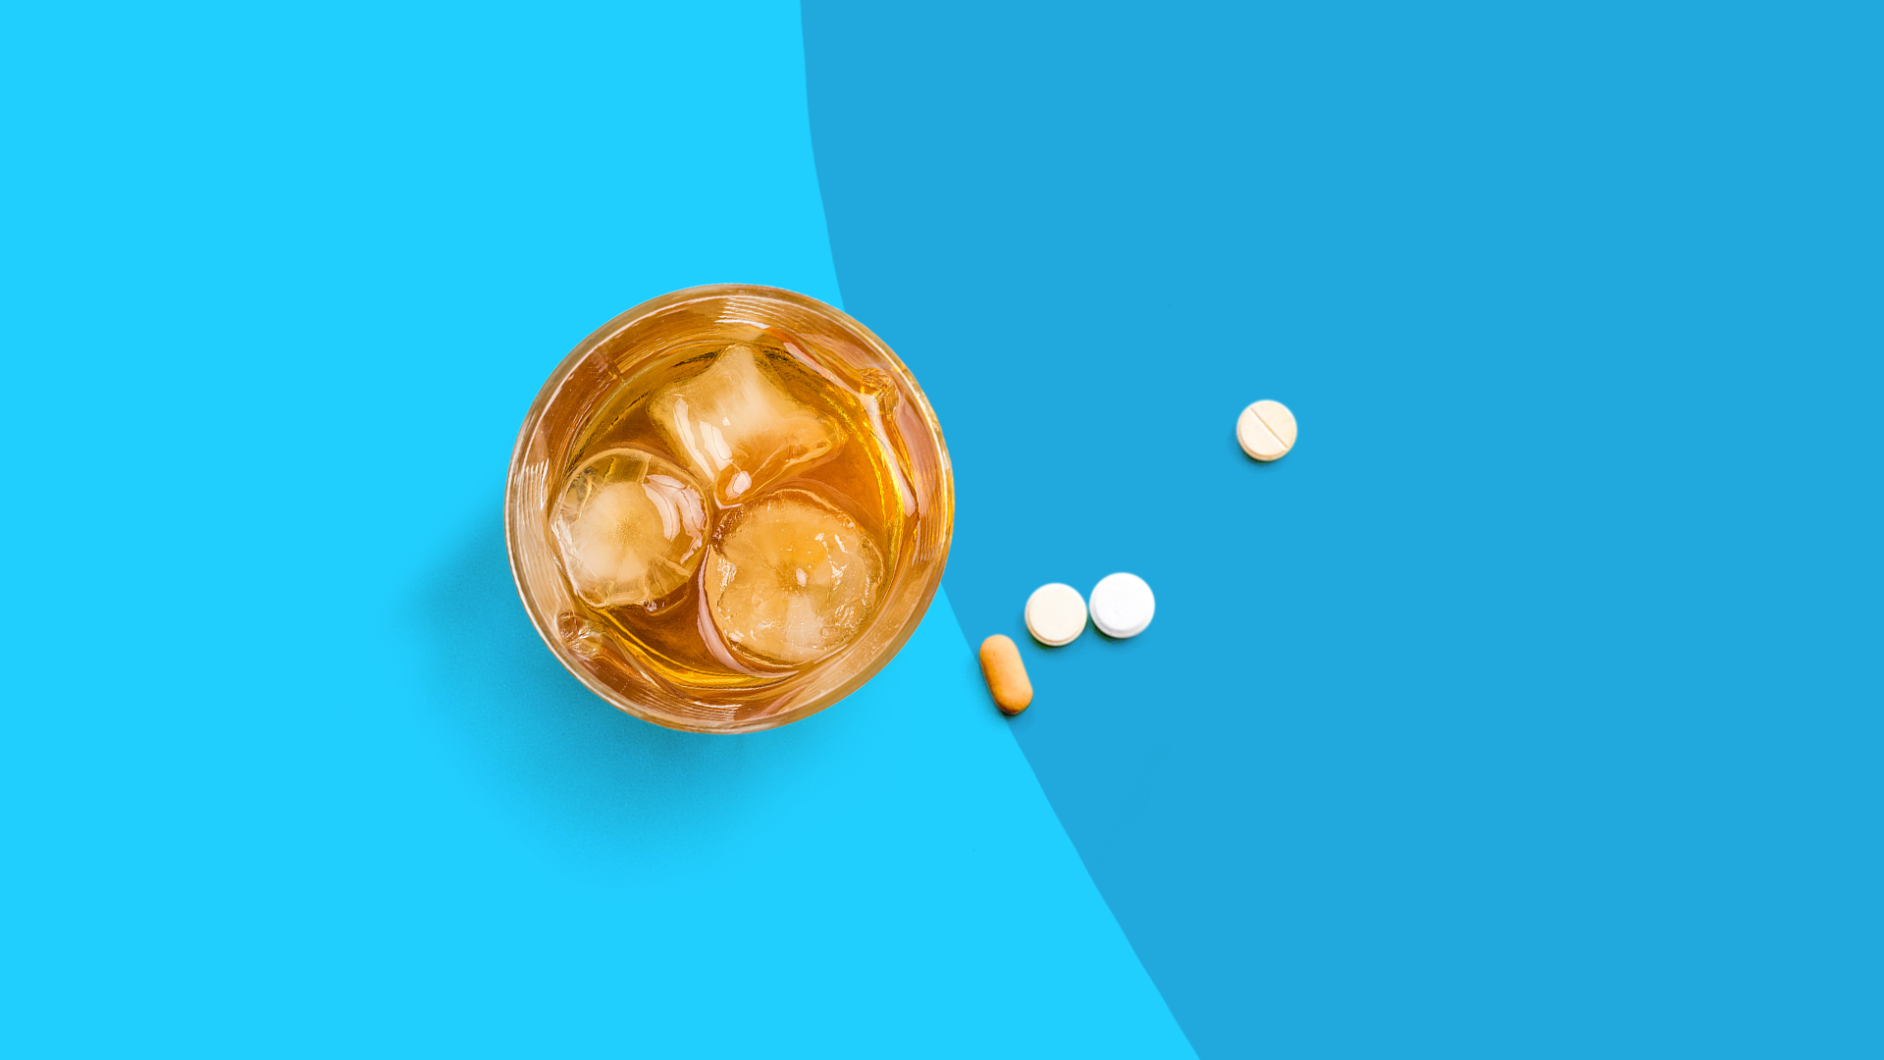 A cocktail with pills next to it: Is it safe to mix alcohol and naproxen?